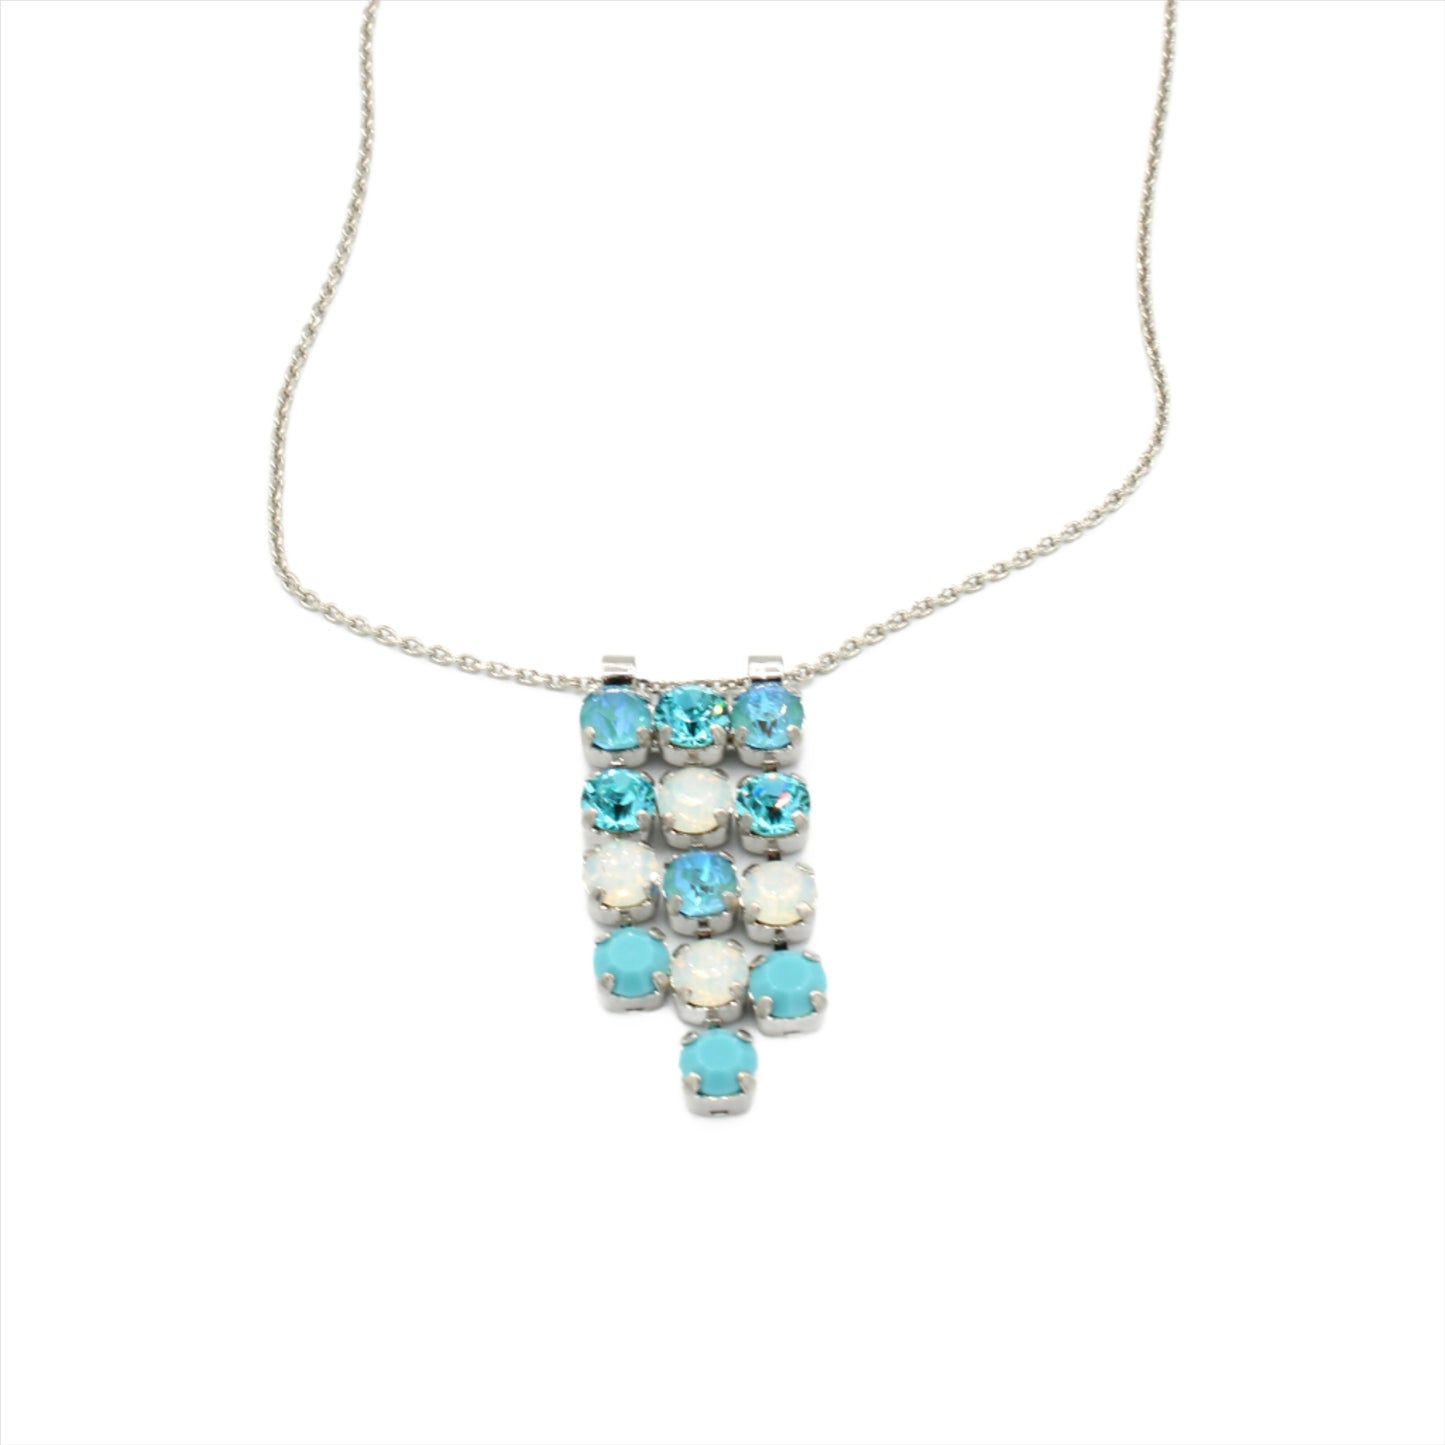 Aegean Coast Collection Waterfall Pendant Necklace